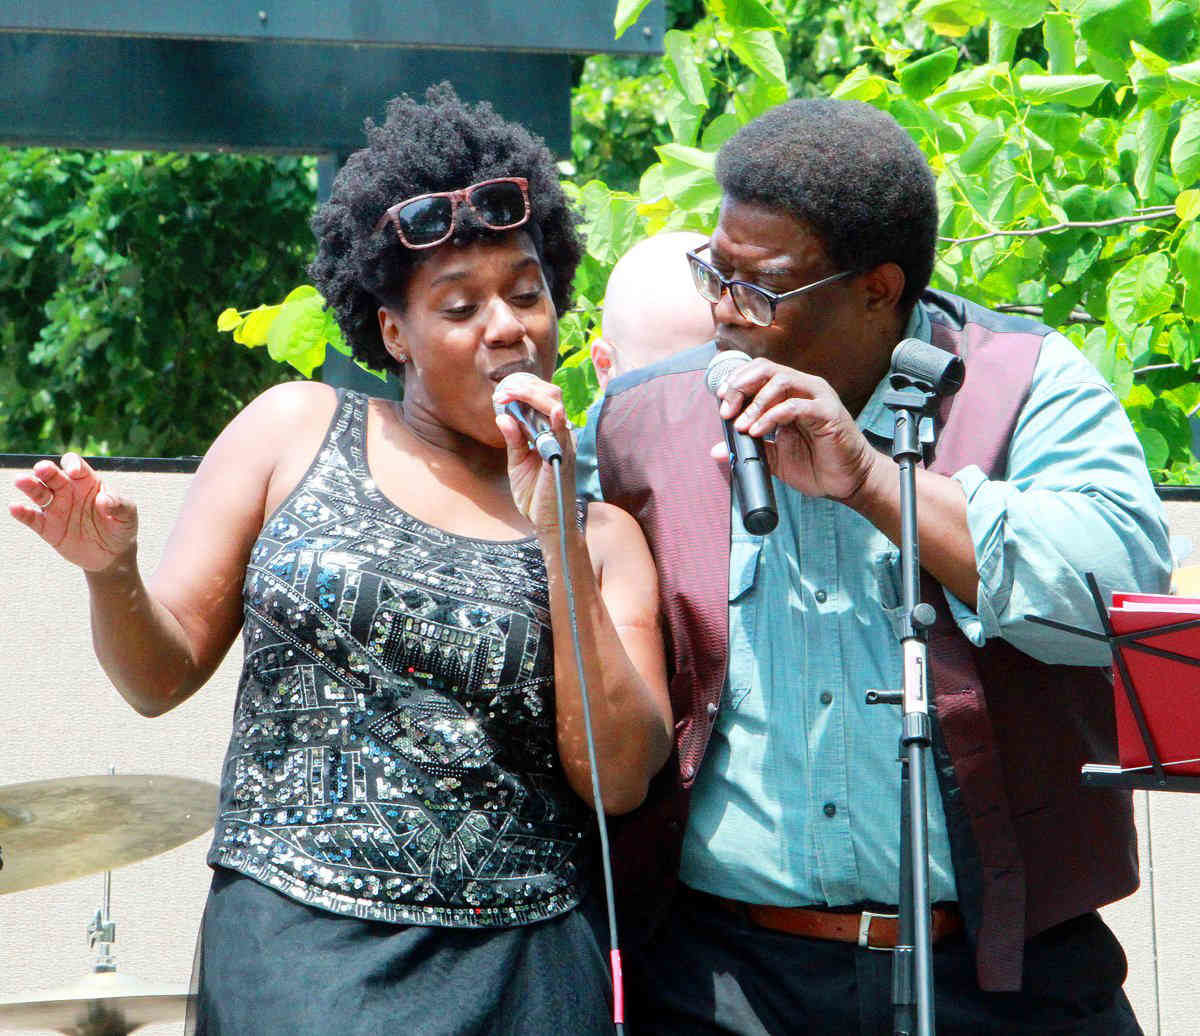 Old-fashioned fun: Oldsters rock out at Marine Park